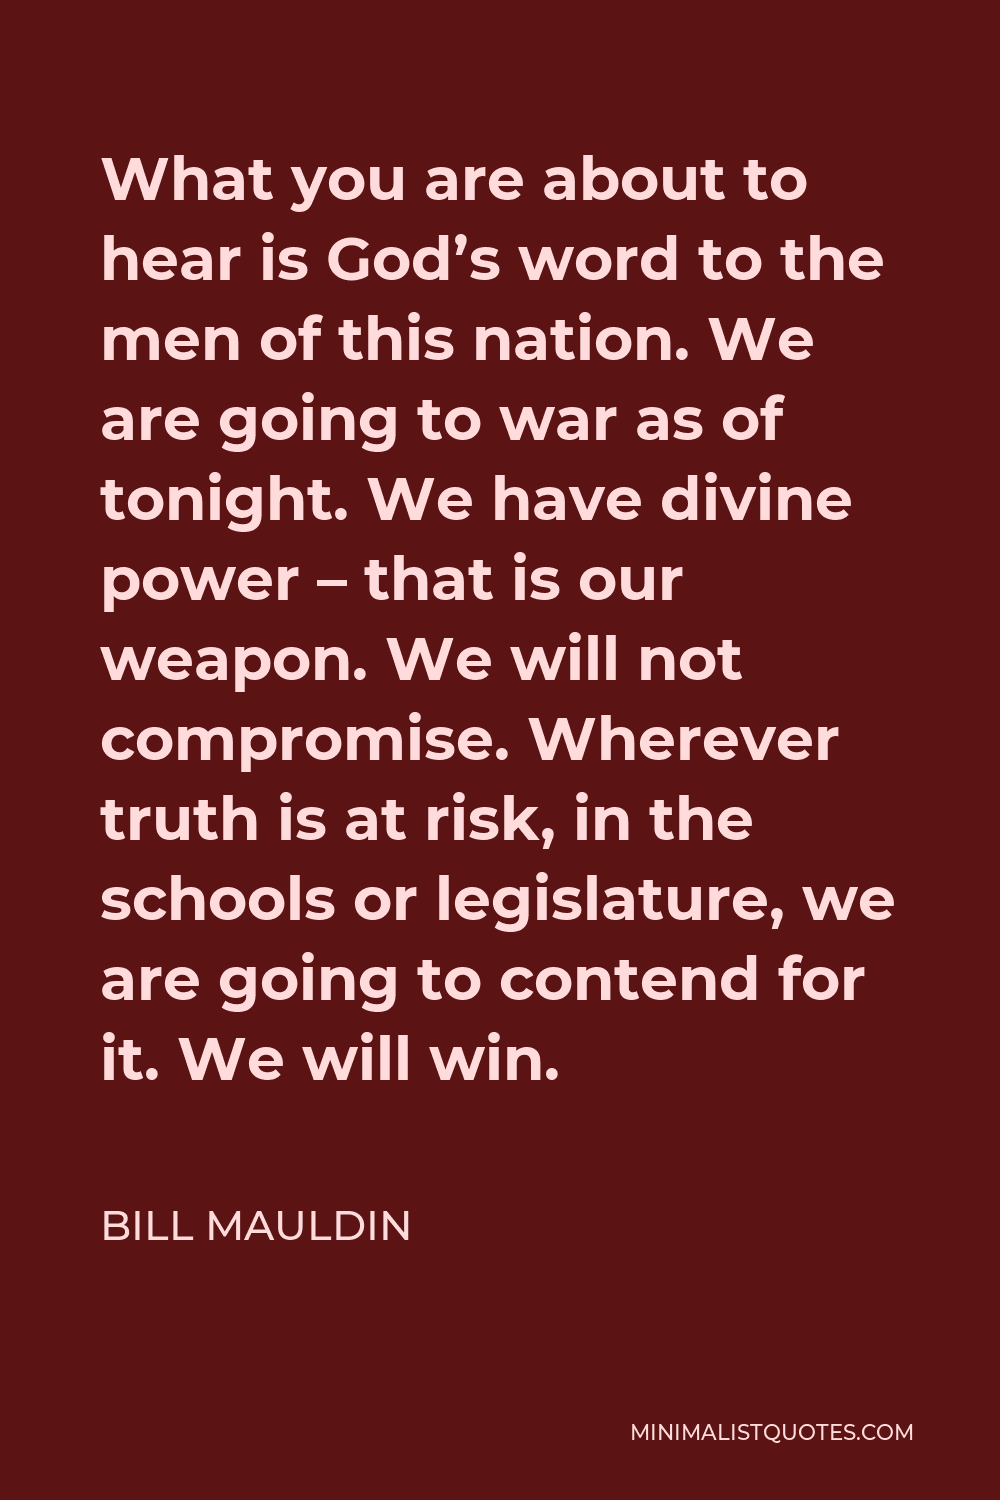 Bill Mauldin Quote - What you are about to hear is God’s word to the men of this nation. We are going to war as of tonight. We have divine power – that is our weapon. We will not compromise. Wherever truth is at risk, in the schools or legislature, we are going to contend for it. We will win.